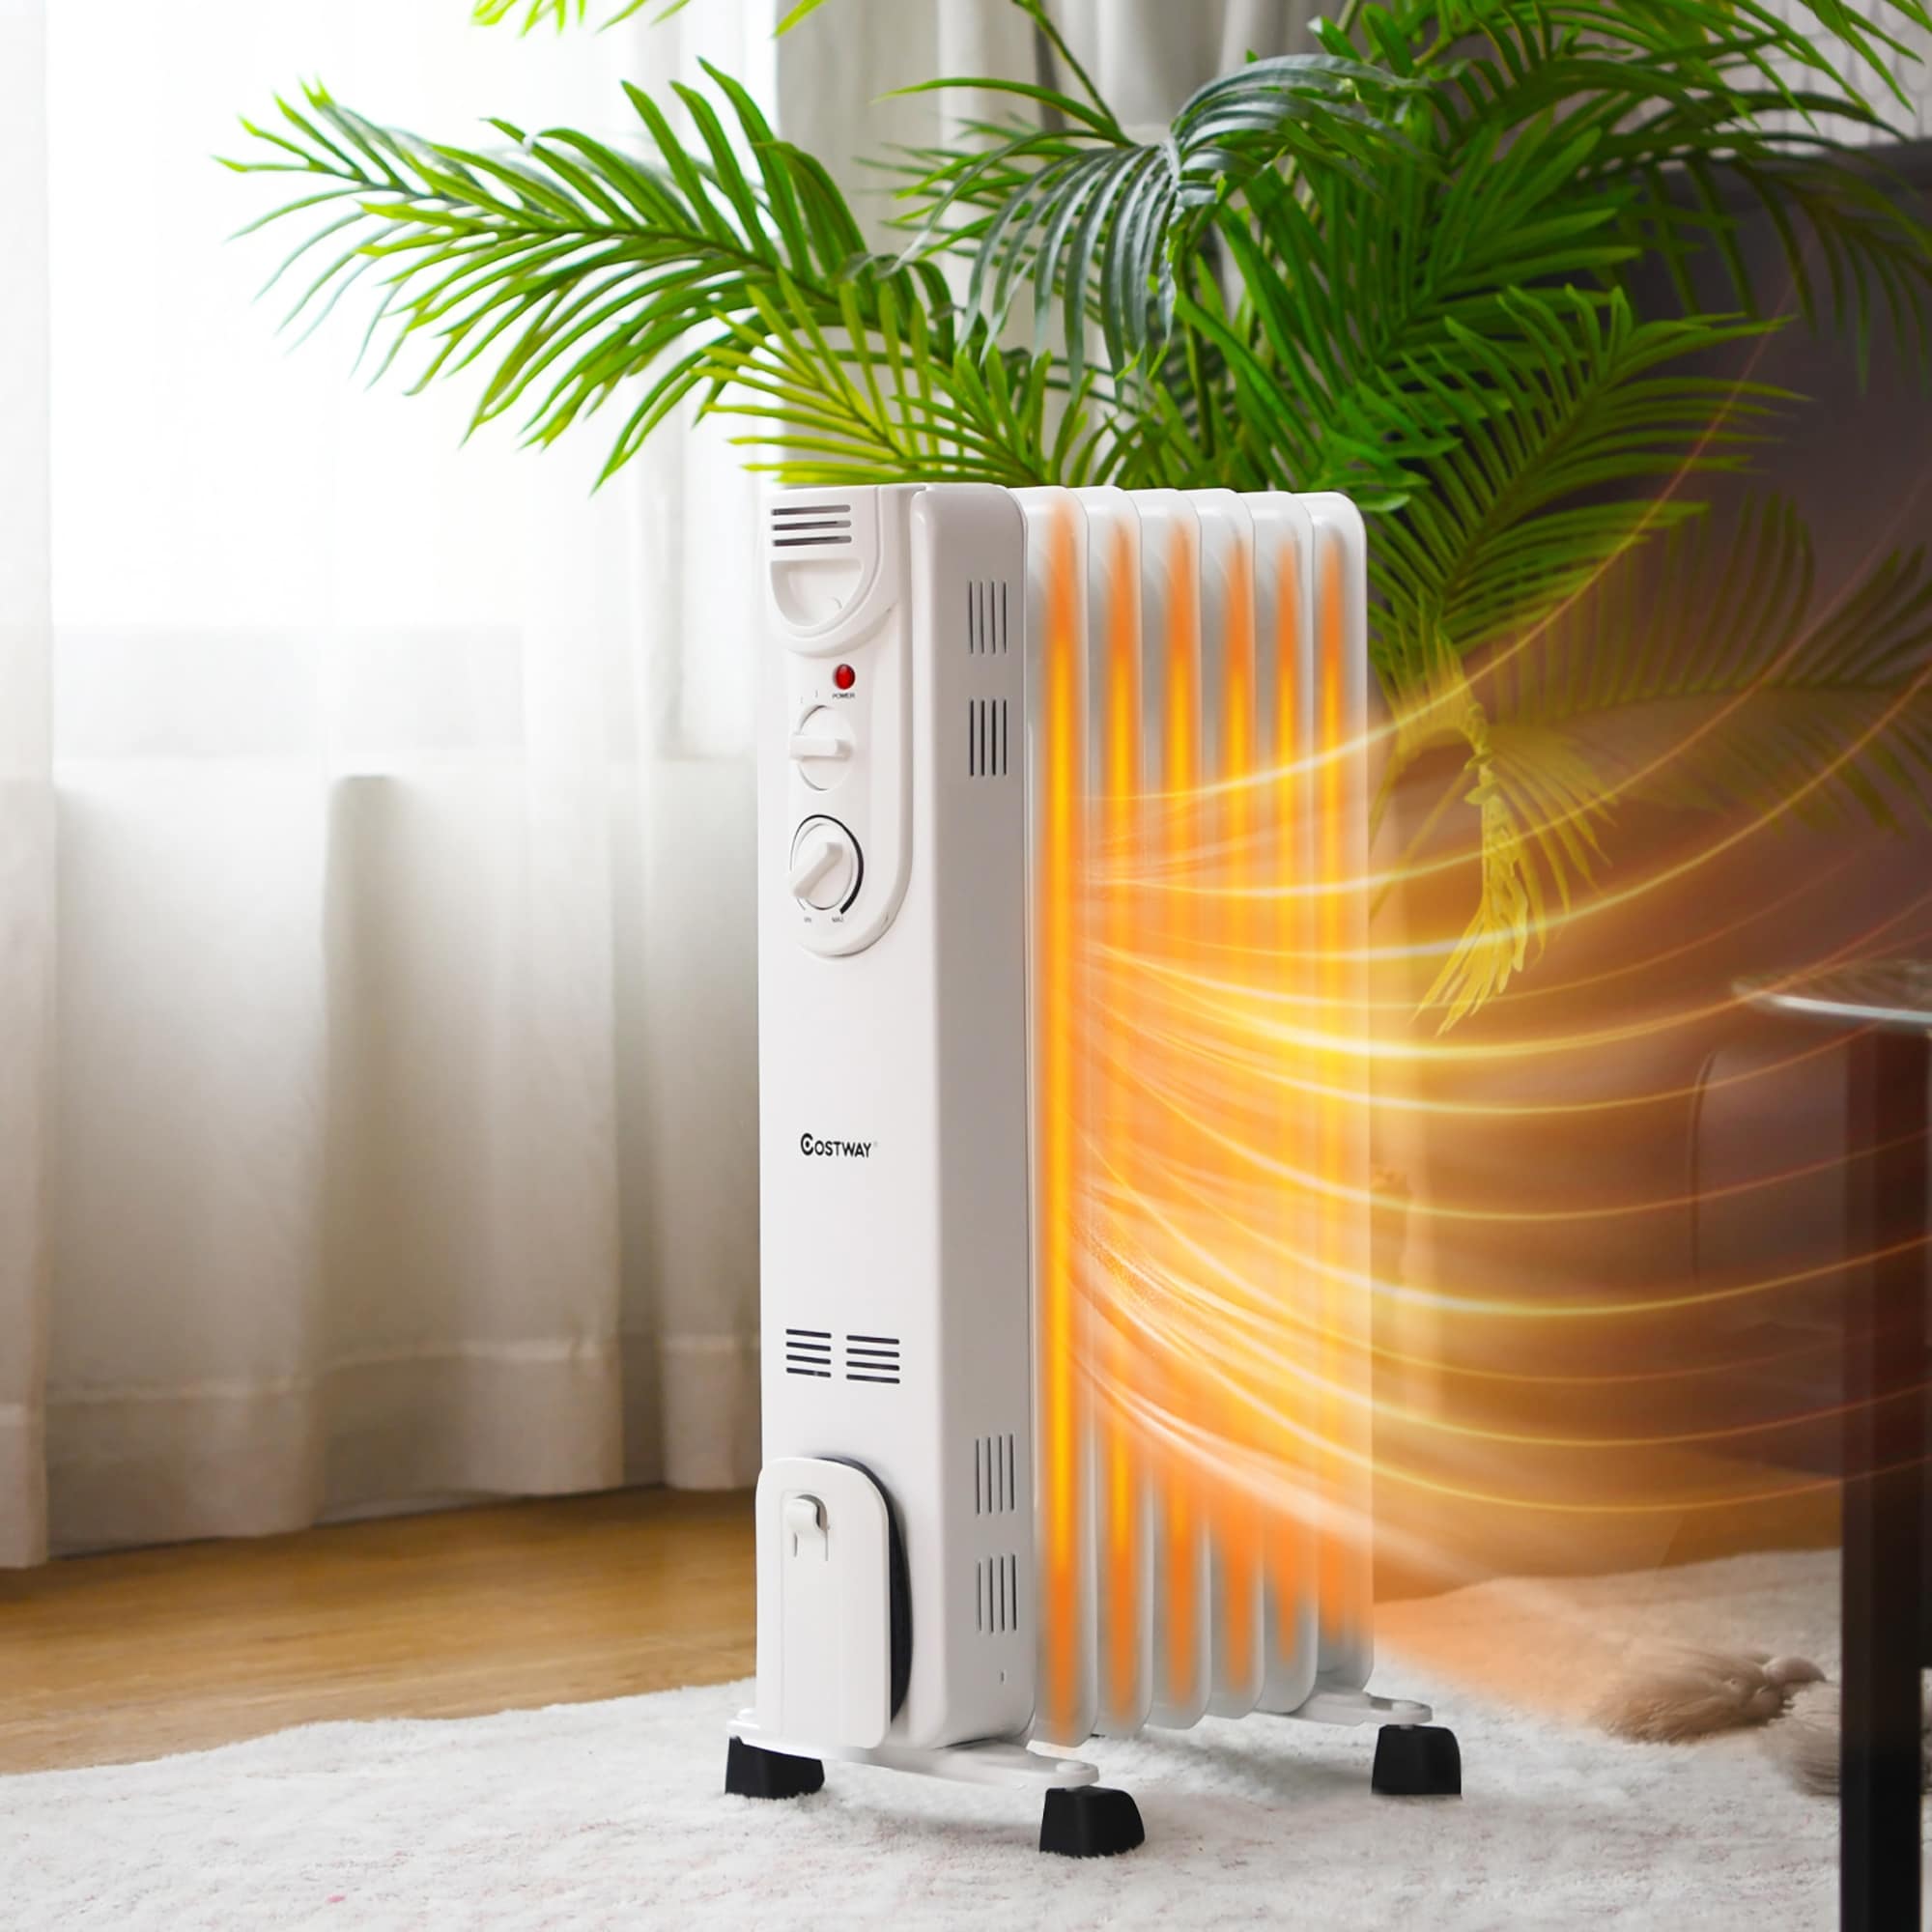 https://ak1.ostkcdn.com/images/products/is/images/direct/6ec7f5ce022fb82674b78d364561ea5be3c95358/Costway-1500W-Electric-Oil-Filled-Radiator-Space-Heater-5-Fin.jpg